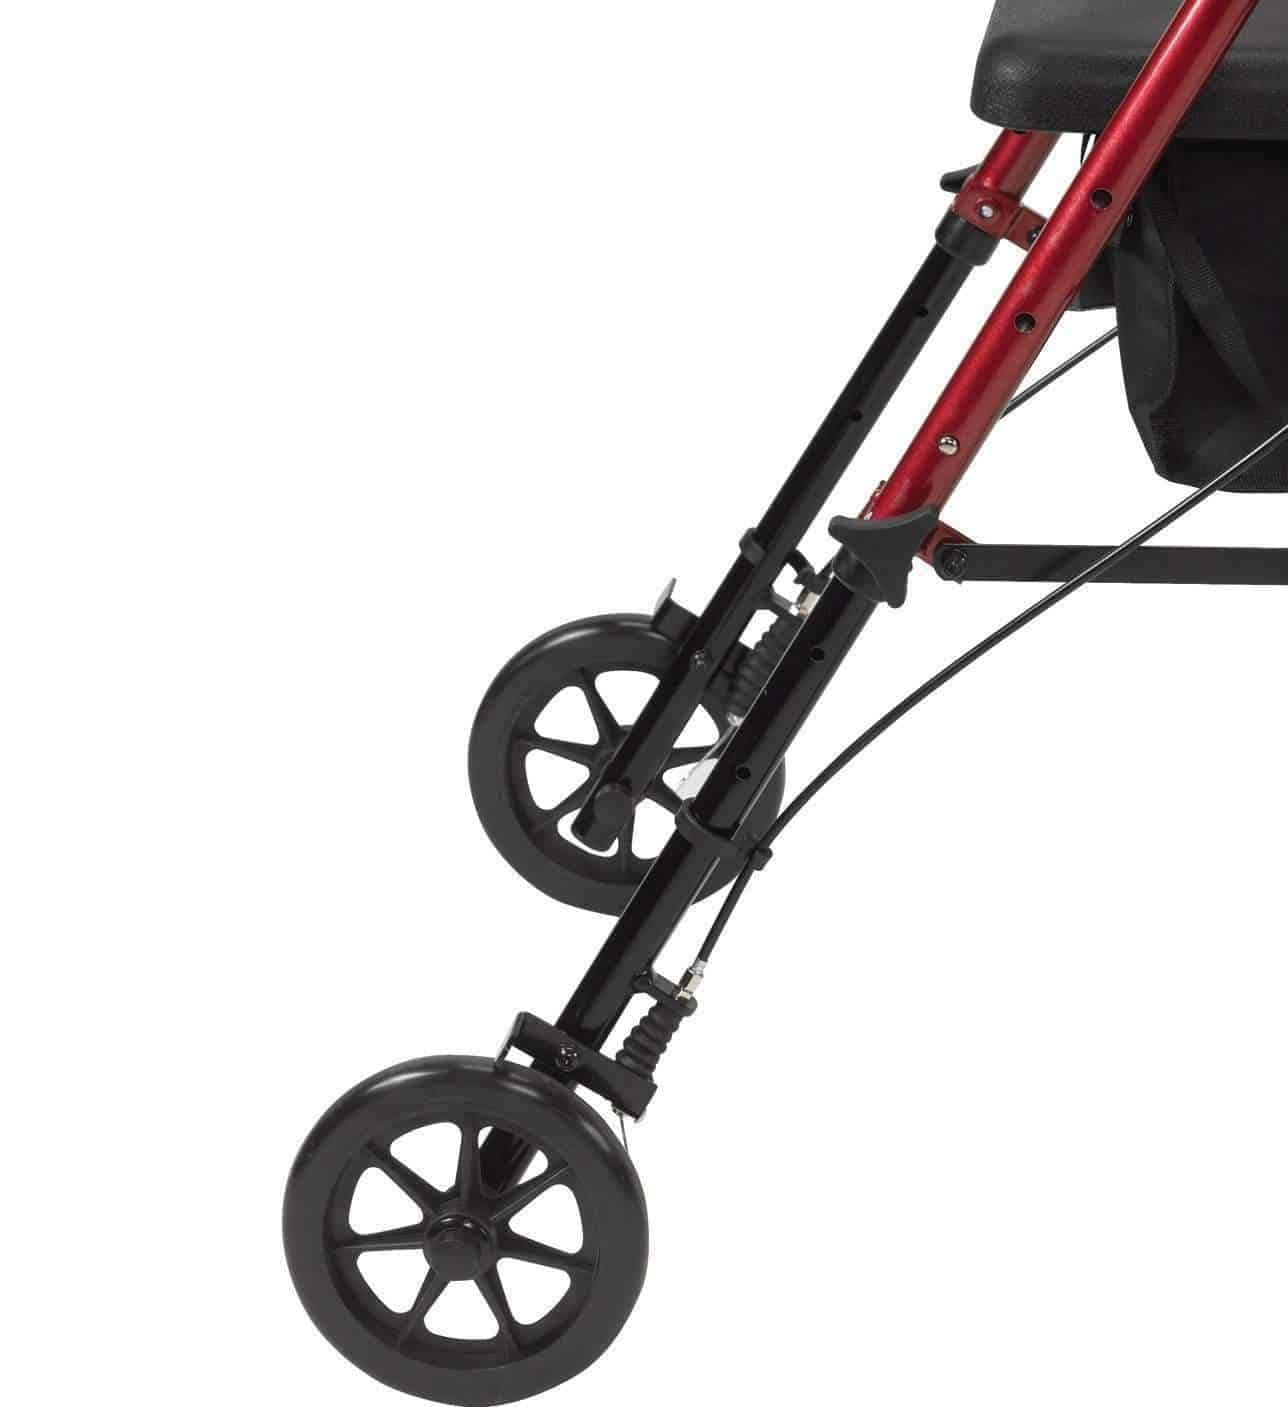 Drive Medical Adjustable Height Rollators with 6" Casters - Open Box - Senior.com Rollators